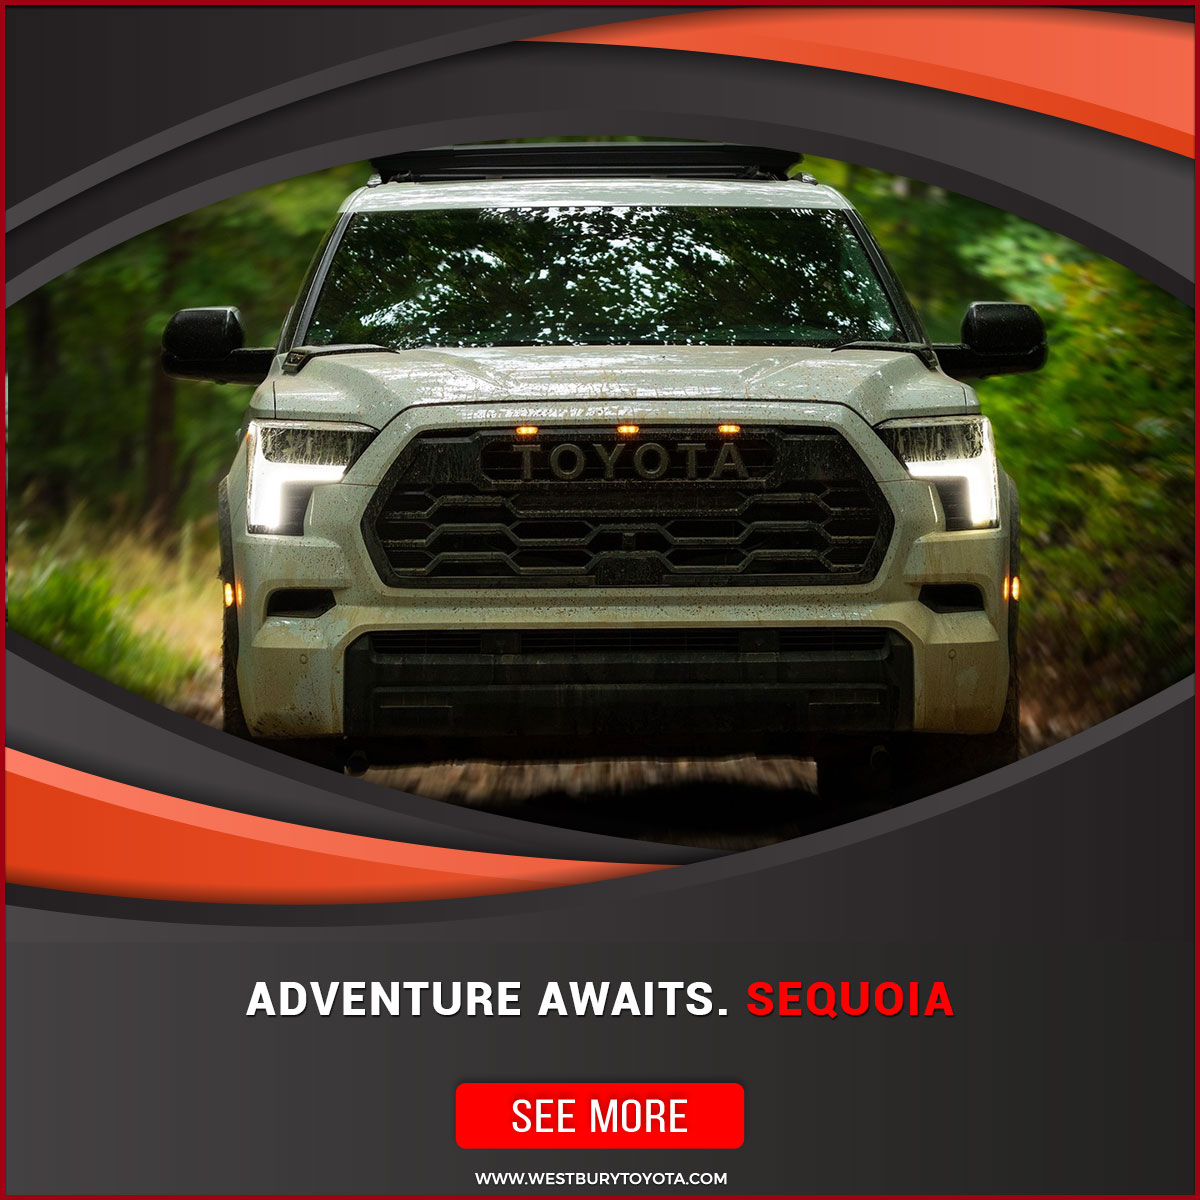 Westbury Toyota is your Sequoia headquarters!
We have Sequoia’s in stock and ready for immediate delivery.
Call to schedule your test drive: 516-272-4499
•
•
•
#toyota #trdpro #toyotasequoia